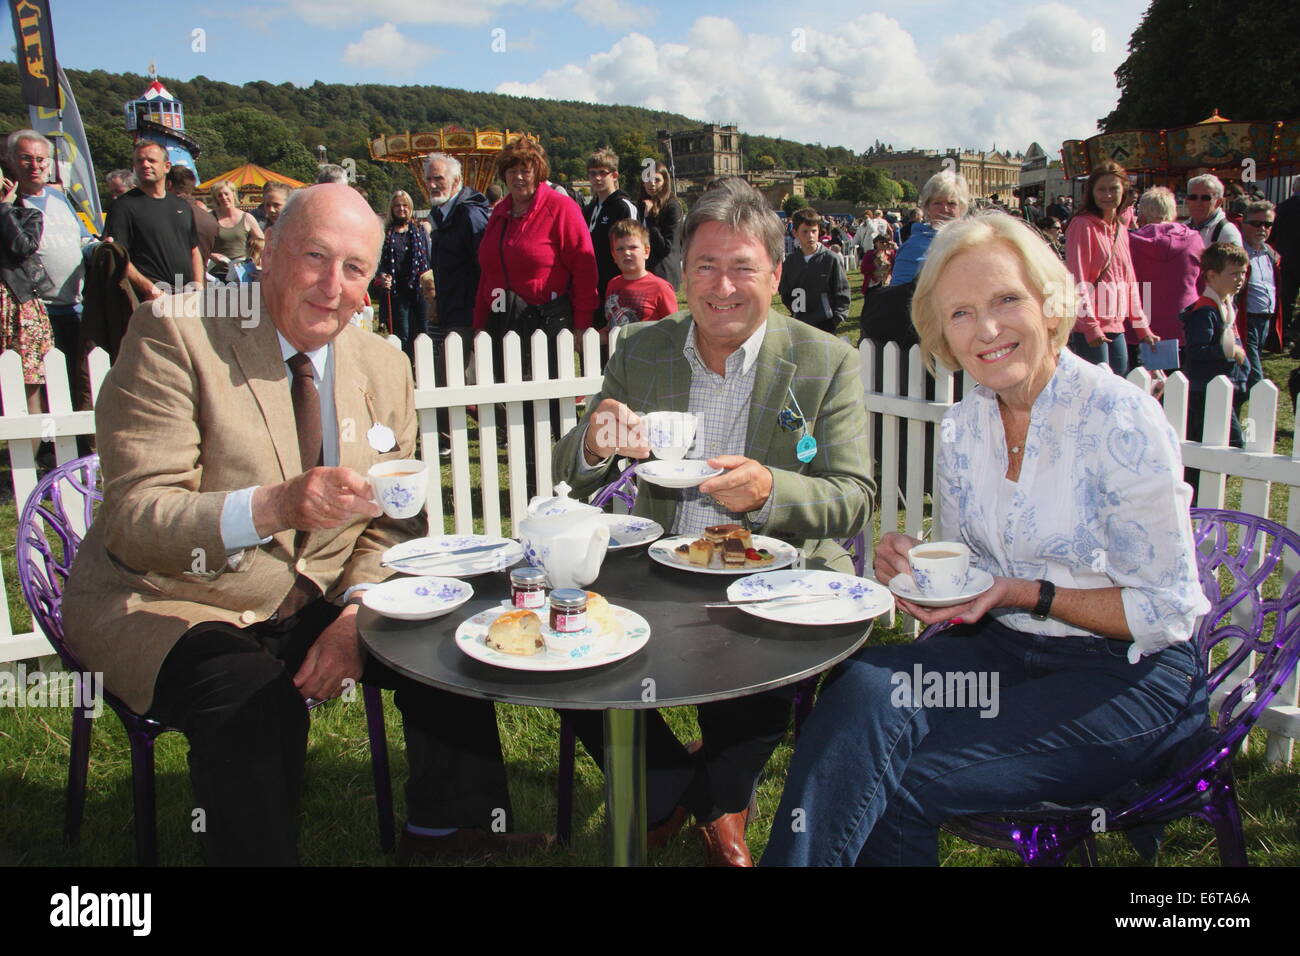 Peak District, Derbyshire, UK. 30 August 2014. Chatsworth House provides the backdrop to afternoon tea for the Duke of Devonshire (L), broadcaster, Alan Titichmarsh (C) and Great British Bake Off television show judge, cook and author, Mary Berry. Hosted by the Duke and Duchess of Devonshire, Chatsworth Country Fair is held in the parkland surrounding Derbyshire stately home, Chatsworth House. The event runs until 31 August. Credit:  Matthew Taylor/Alamy Live News Stock Photo